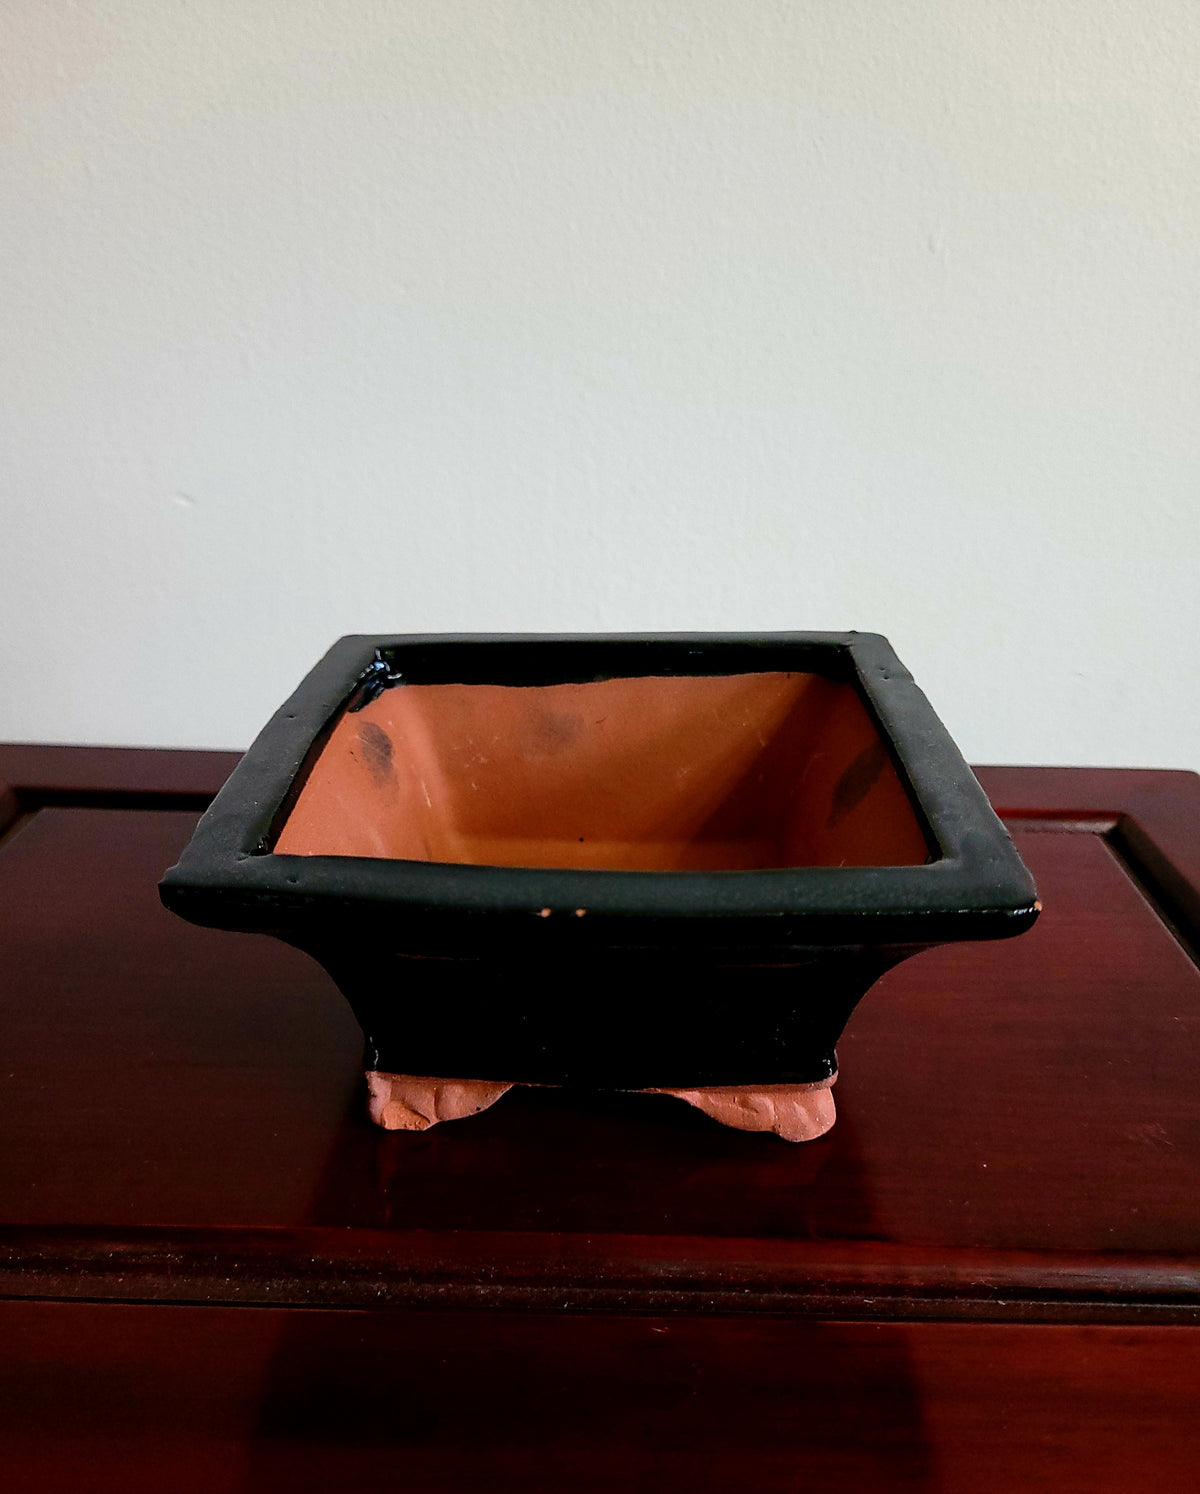 4" Chinese Glazed Square Bonsai Pot with flared sides